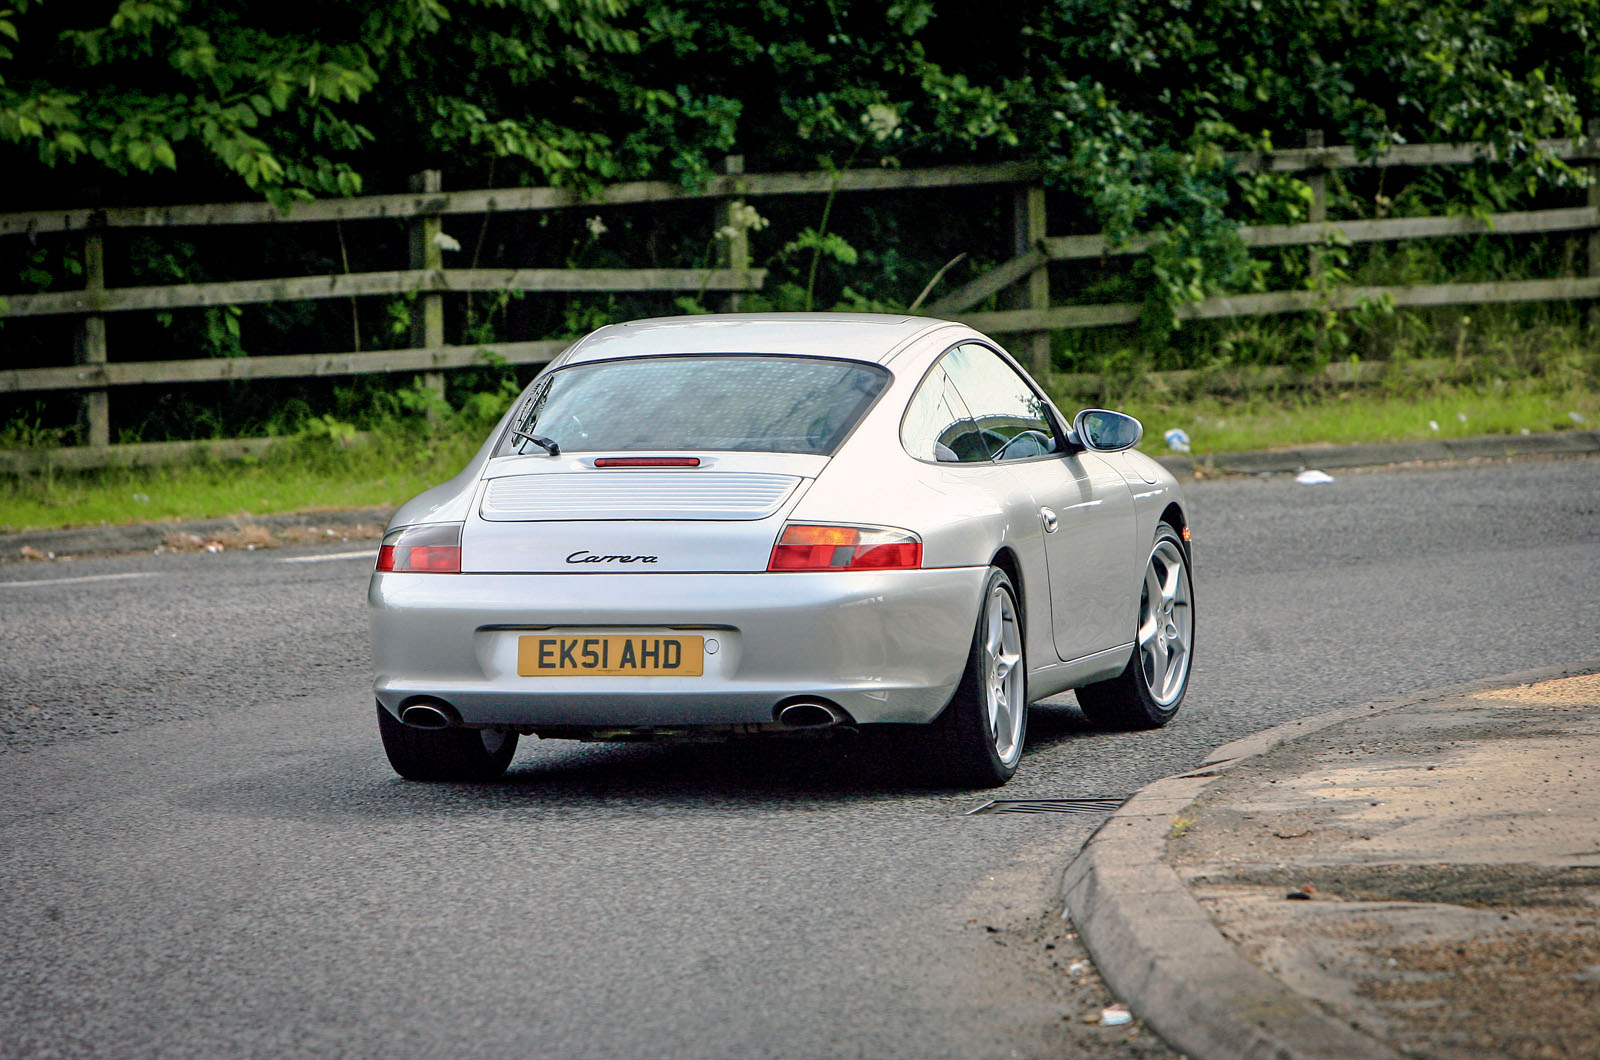 Used car buying guide: Porsche 911 | Autocar